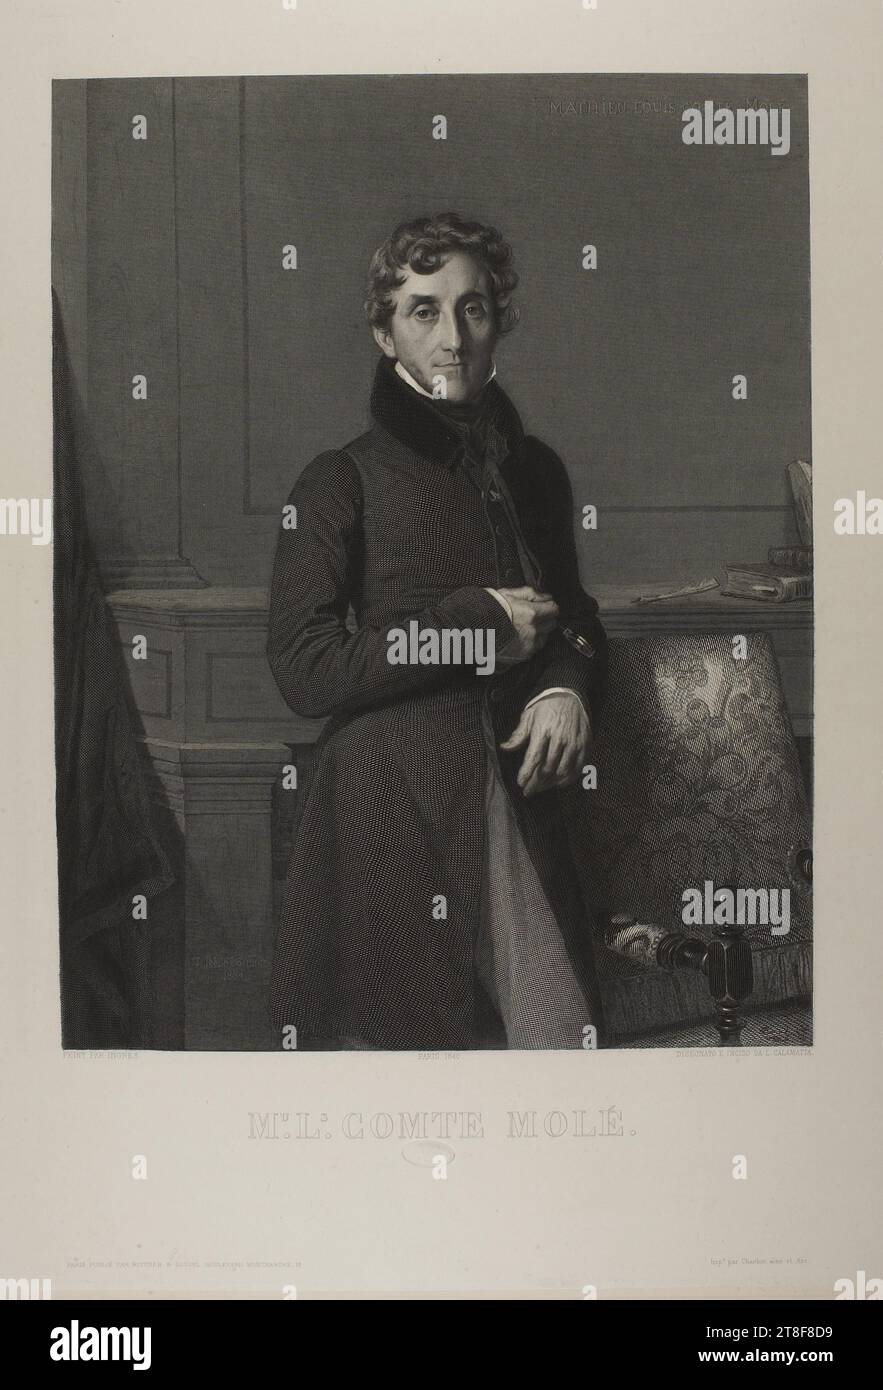 Count Molé, Luigi Calamatta, 1801-1868, 1840, Graphic Art, Copper Engraving, When Jean-Auguste-Dominique Ingres (1780-1867) painted the portrait of Mathieu Louis Count Molé (1781-1855) in 1834, only a few months were to elapse before Molé became his country’s Minister of Foreign Affairs. It was also part of his political career that in 1813, at the age of only 32, he became Minister of Justice. In the picture Stock Photo